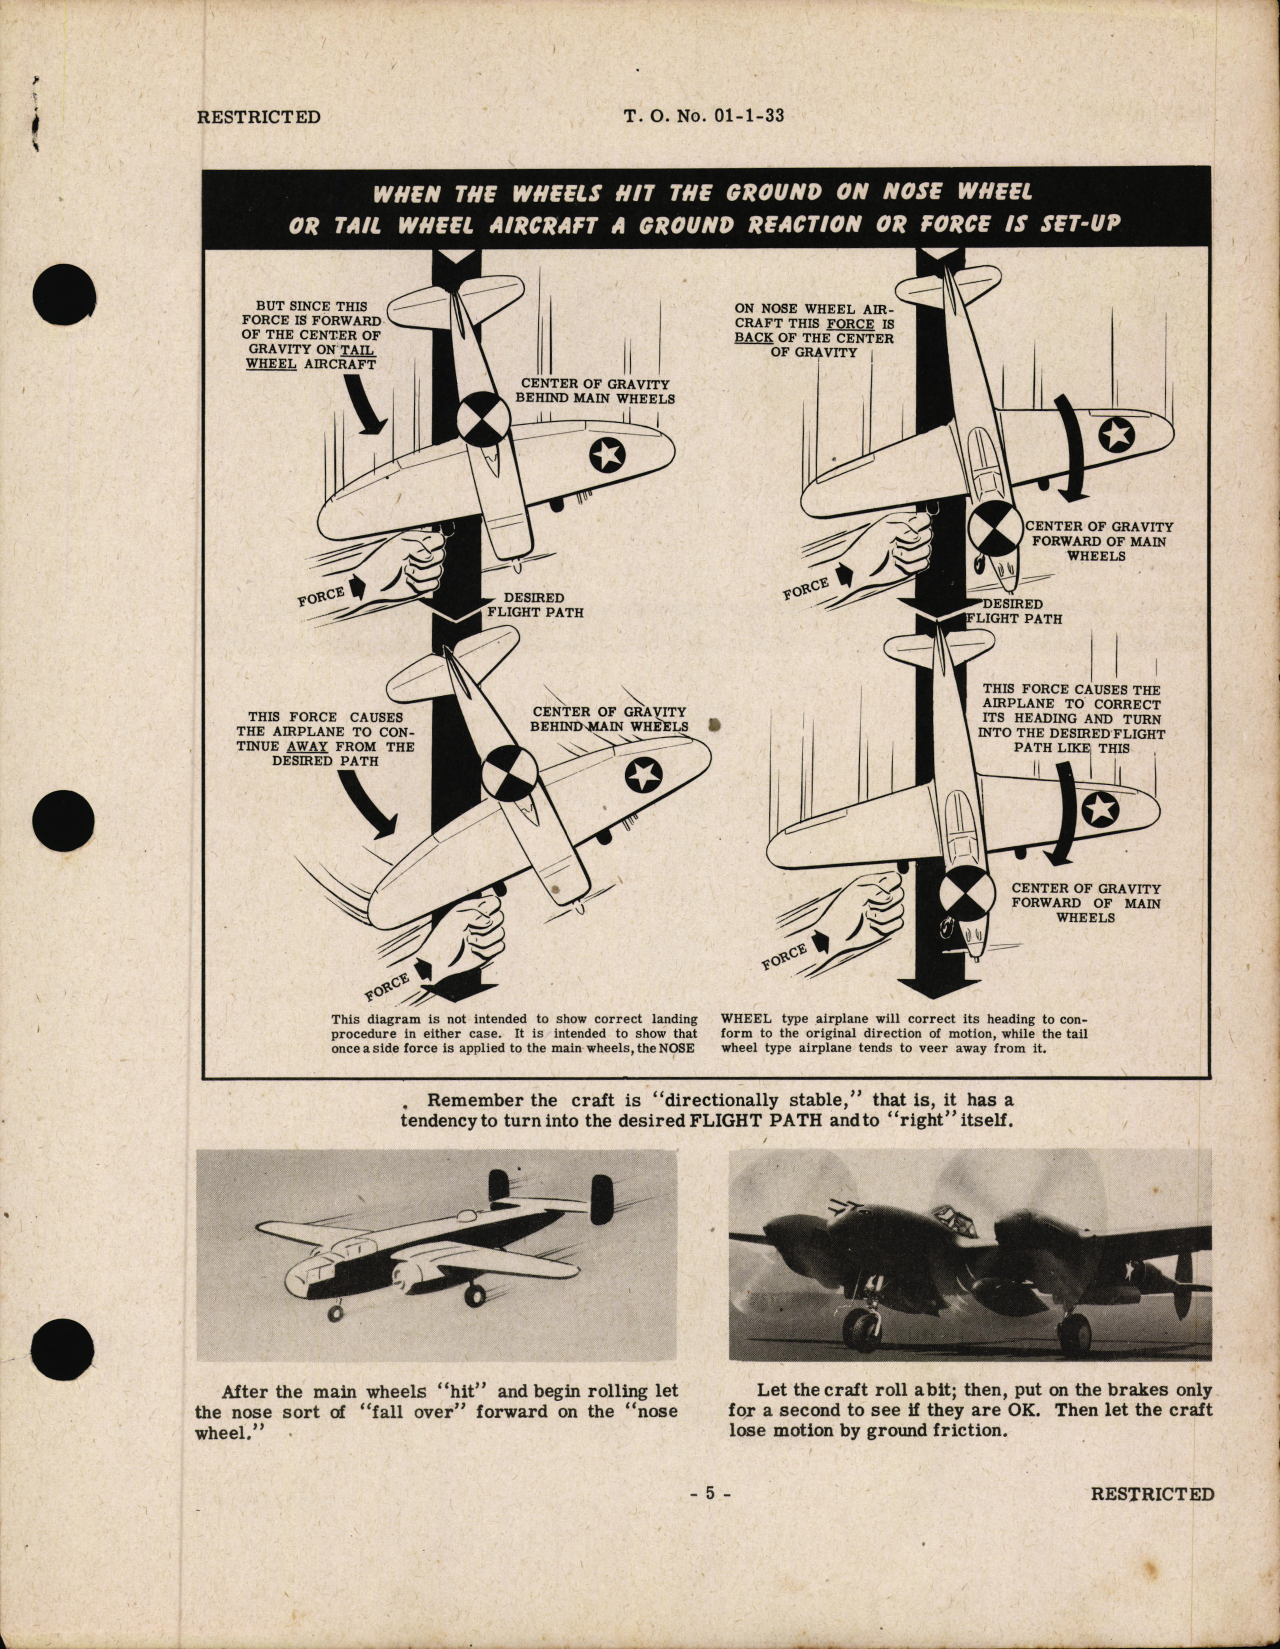 Sample page  5 from AirCorps Library document: Operation & Technique of Nose Wheel Airplanes, 01-1-33